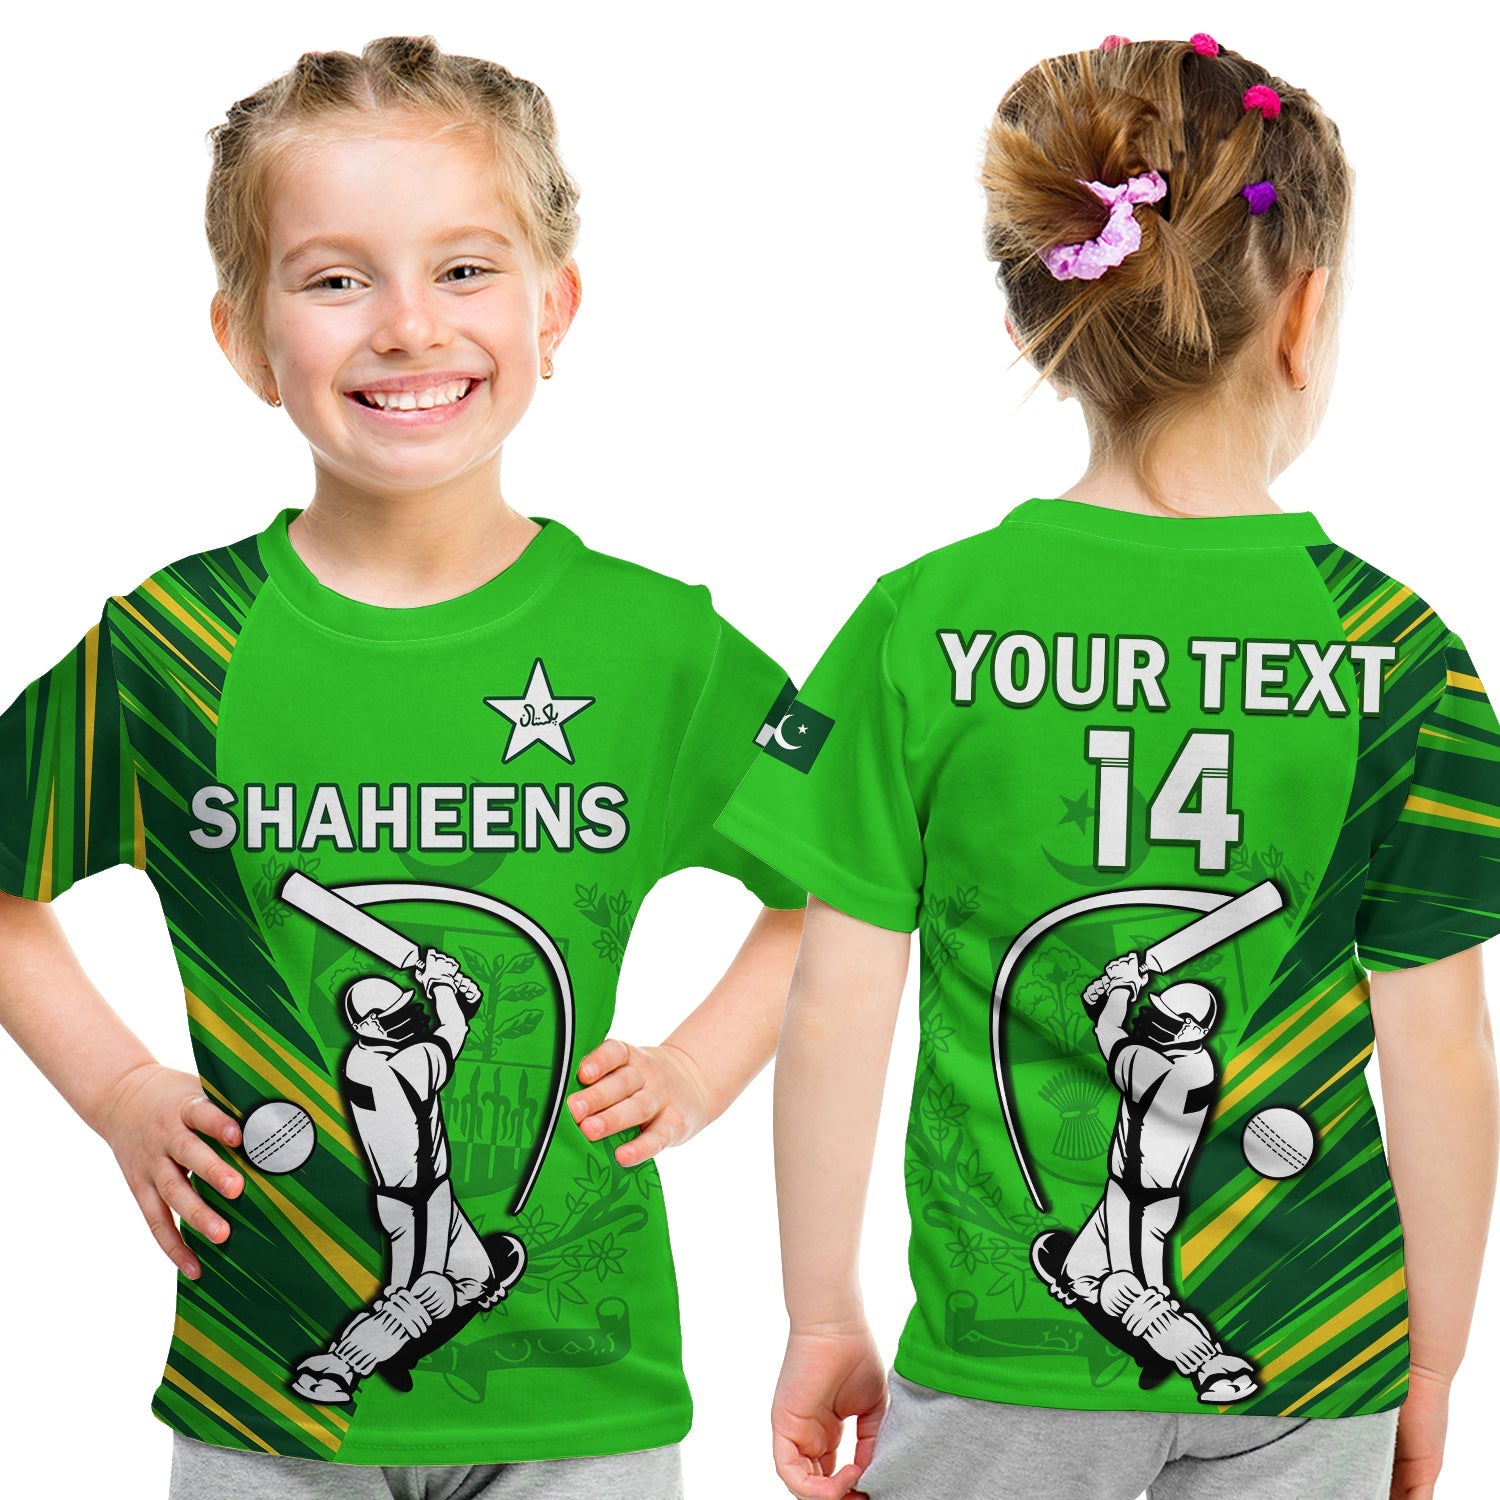 custom-text-and-number-pakistan-cricket-t-shirt-kid-go-shaheens-simple-style